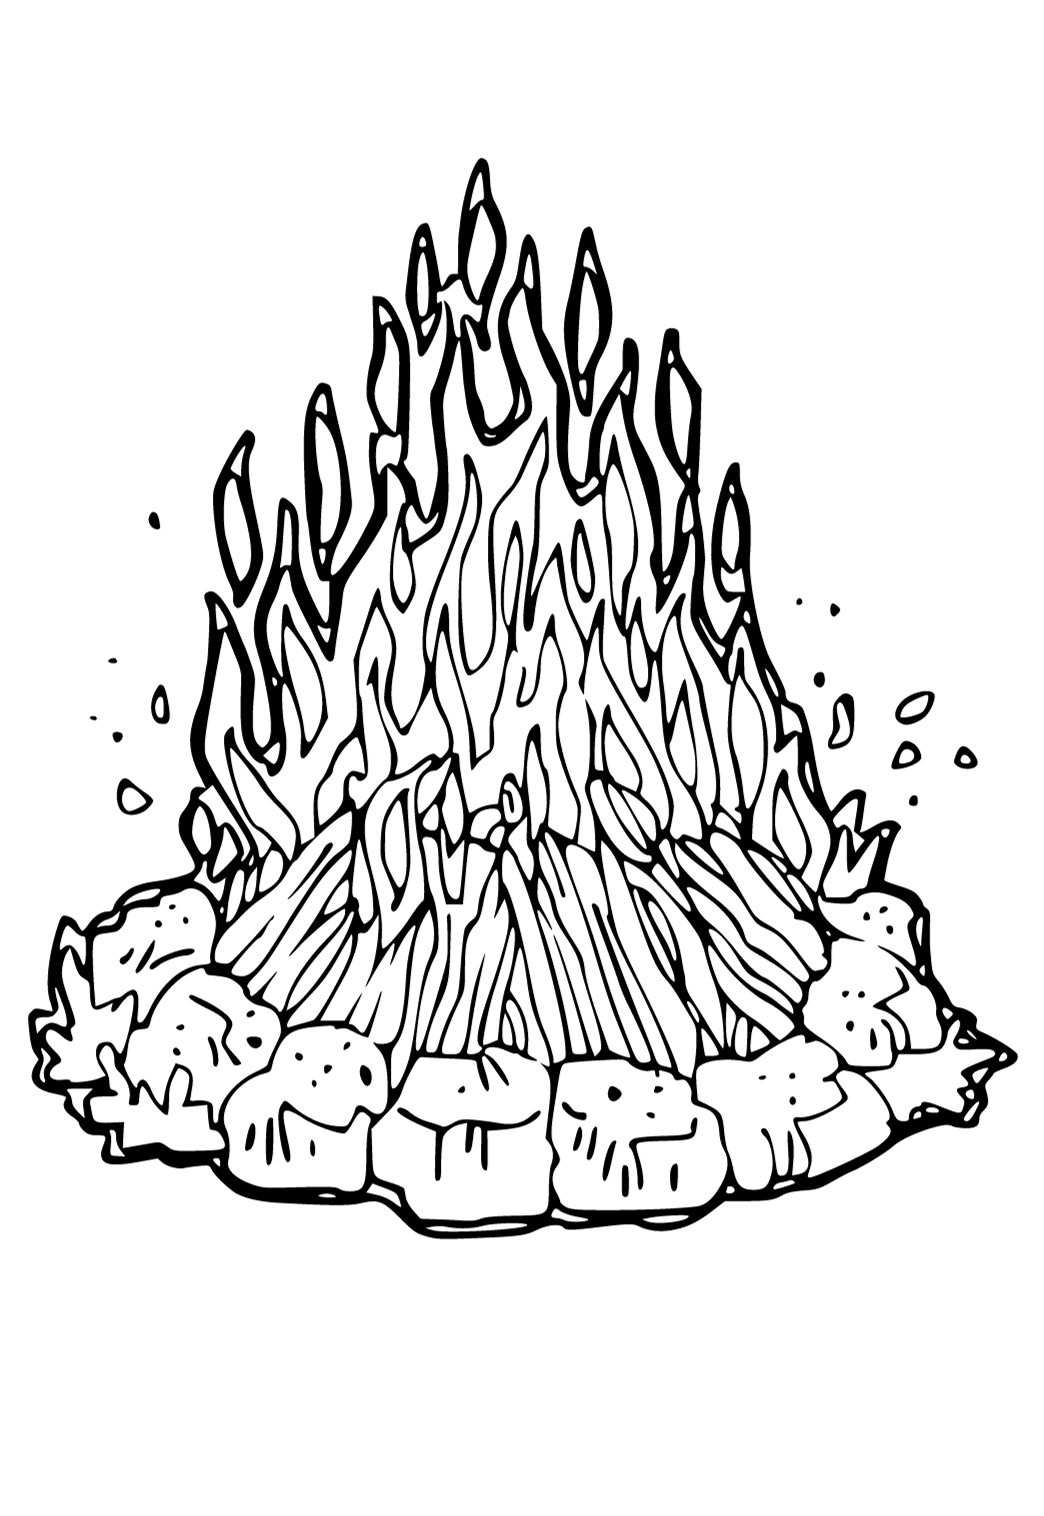 Free printable camp fire flame coloring page for adults and kids